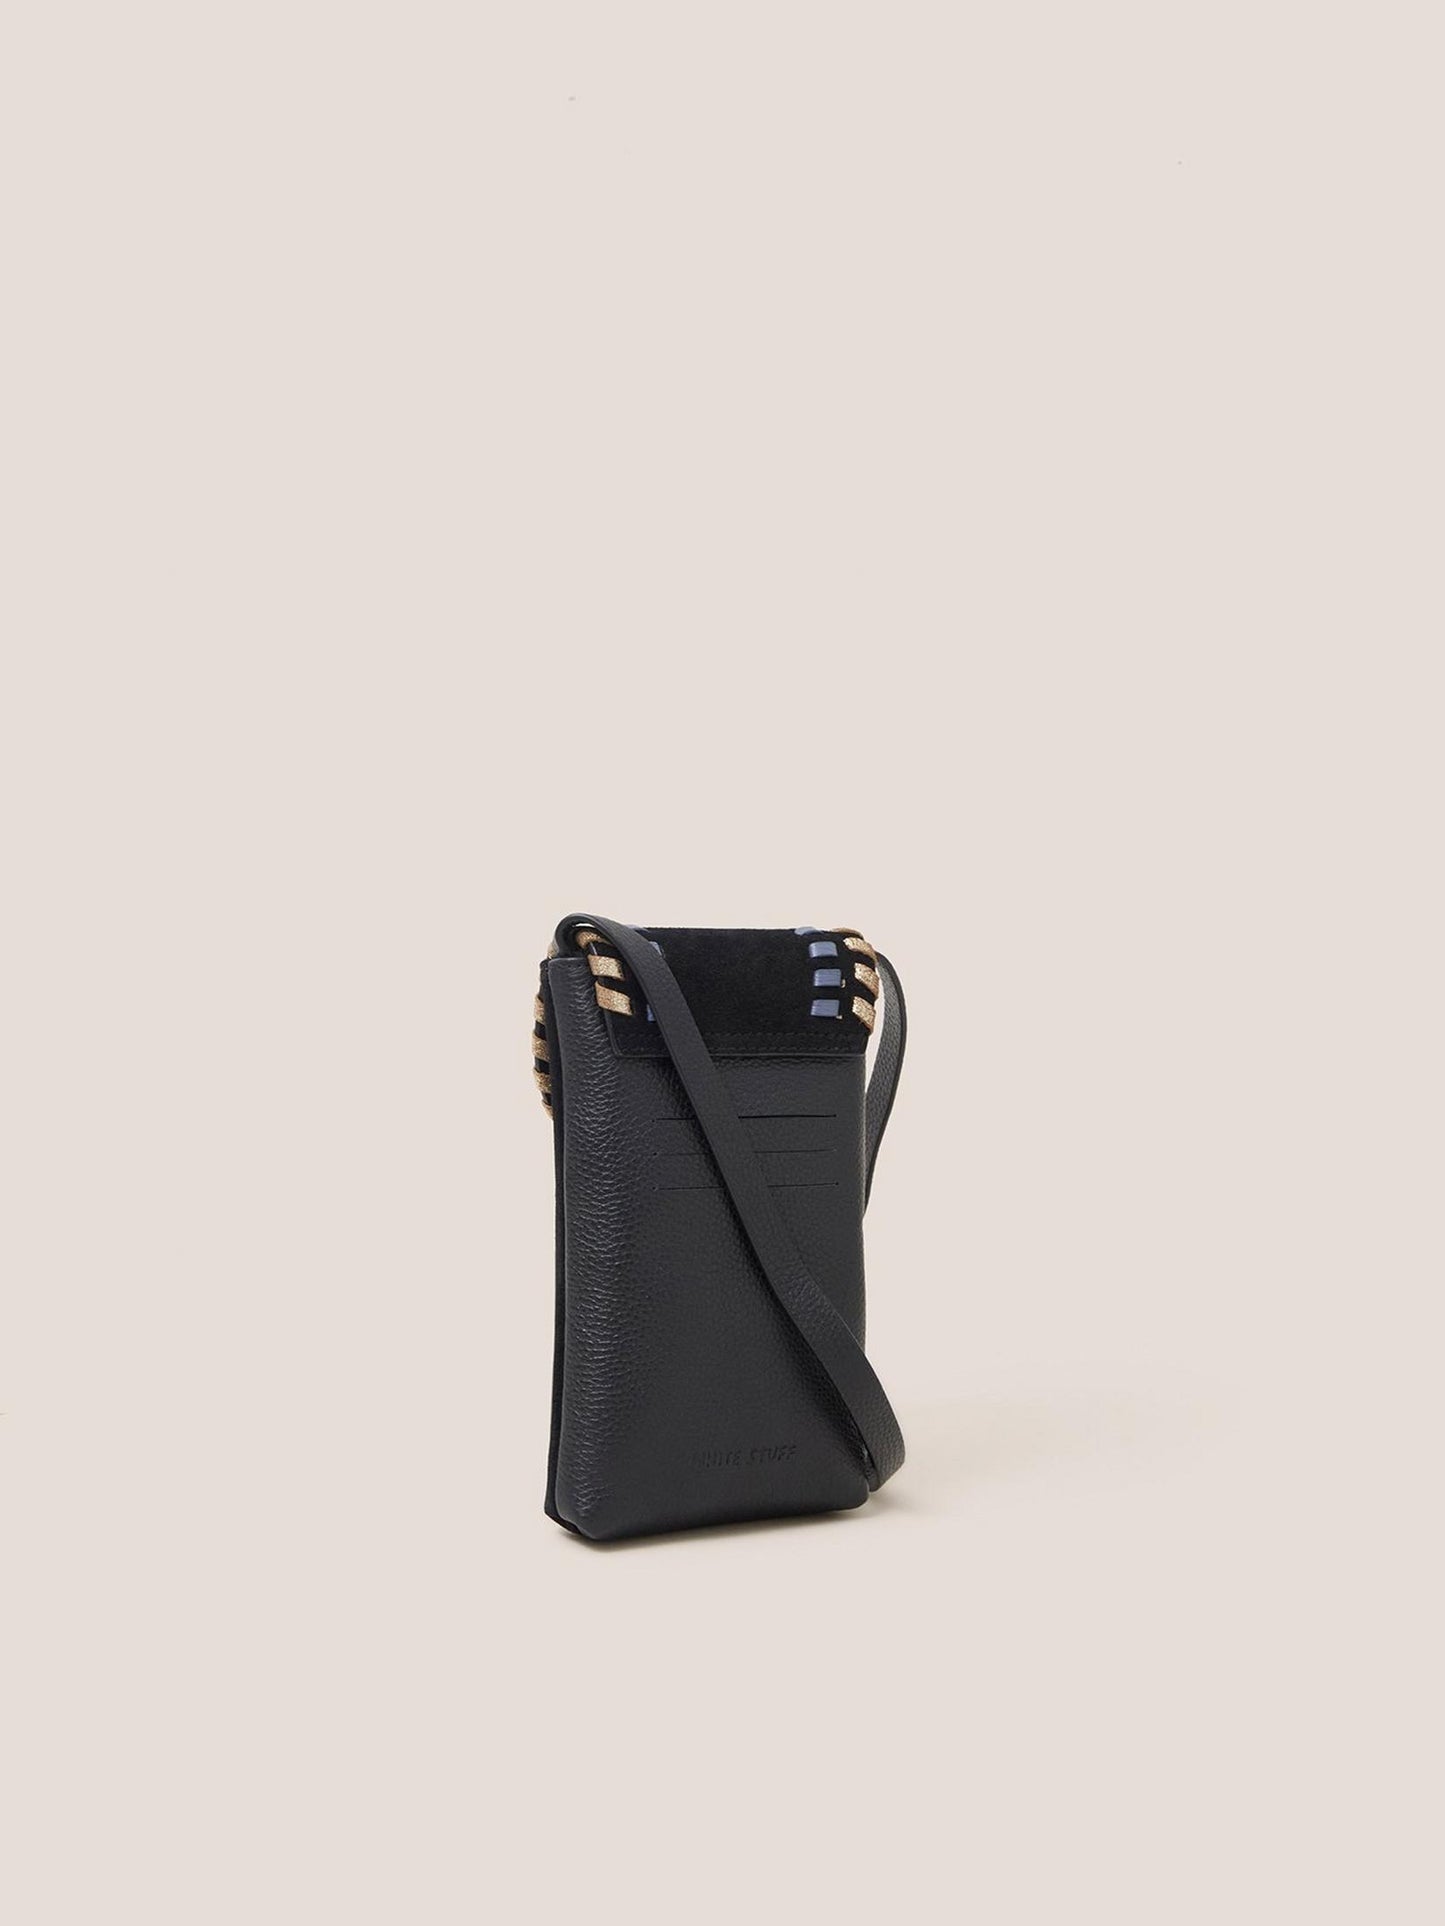 White Stuff Whipstitch Leather Phone Bag in Black suede